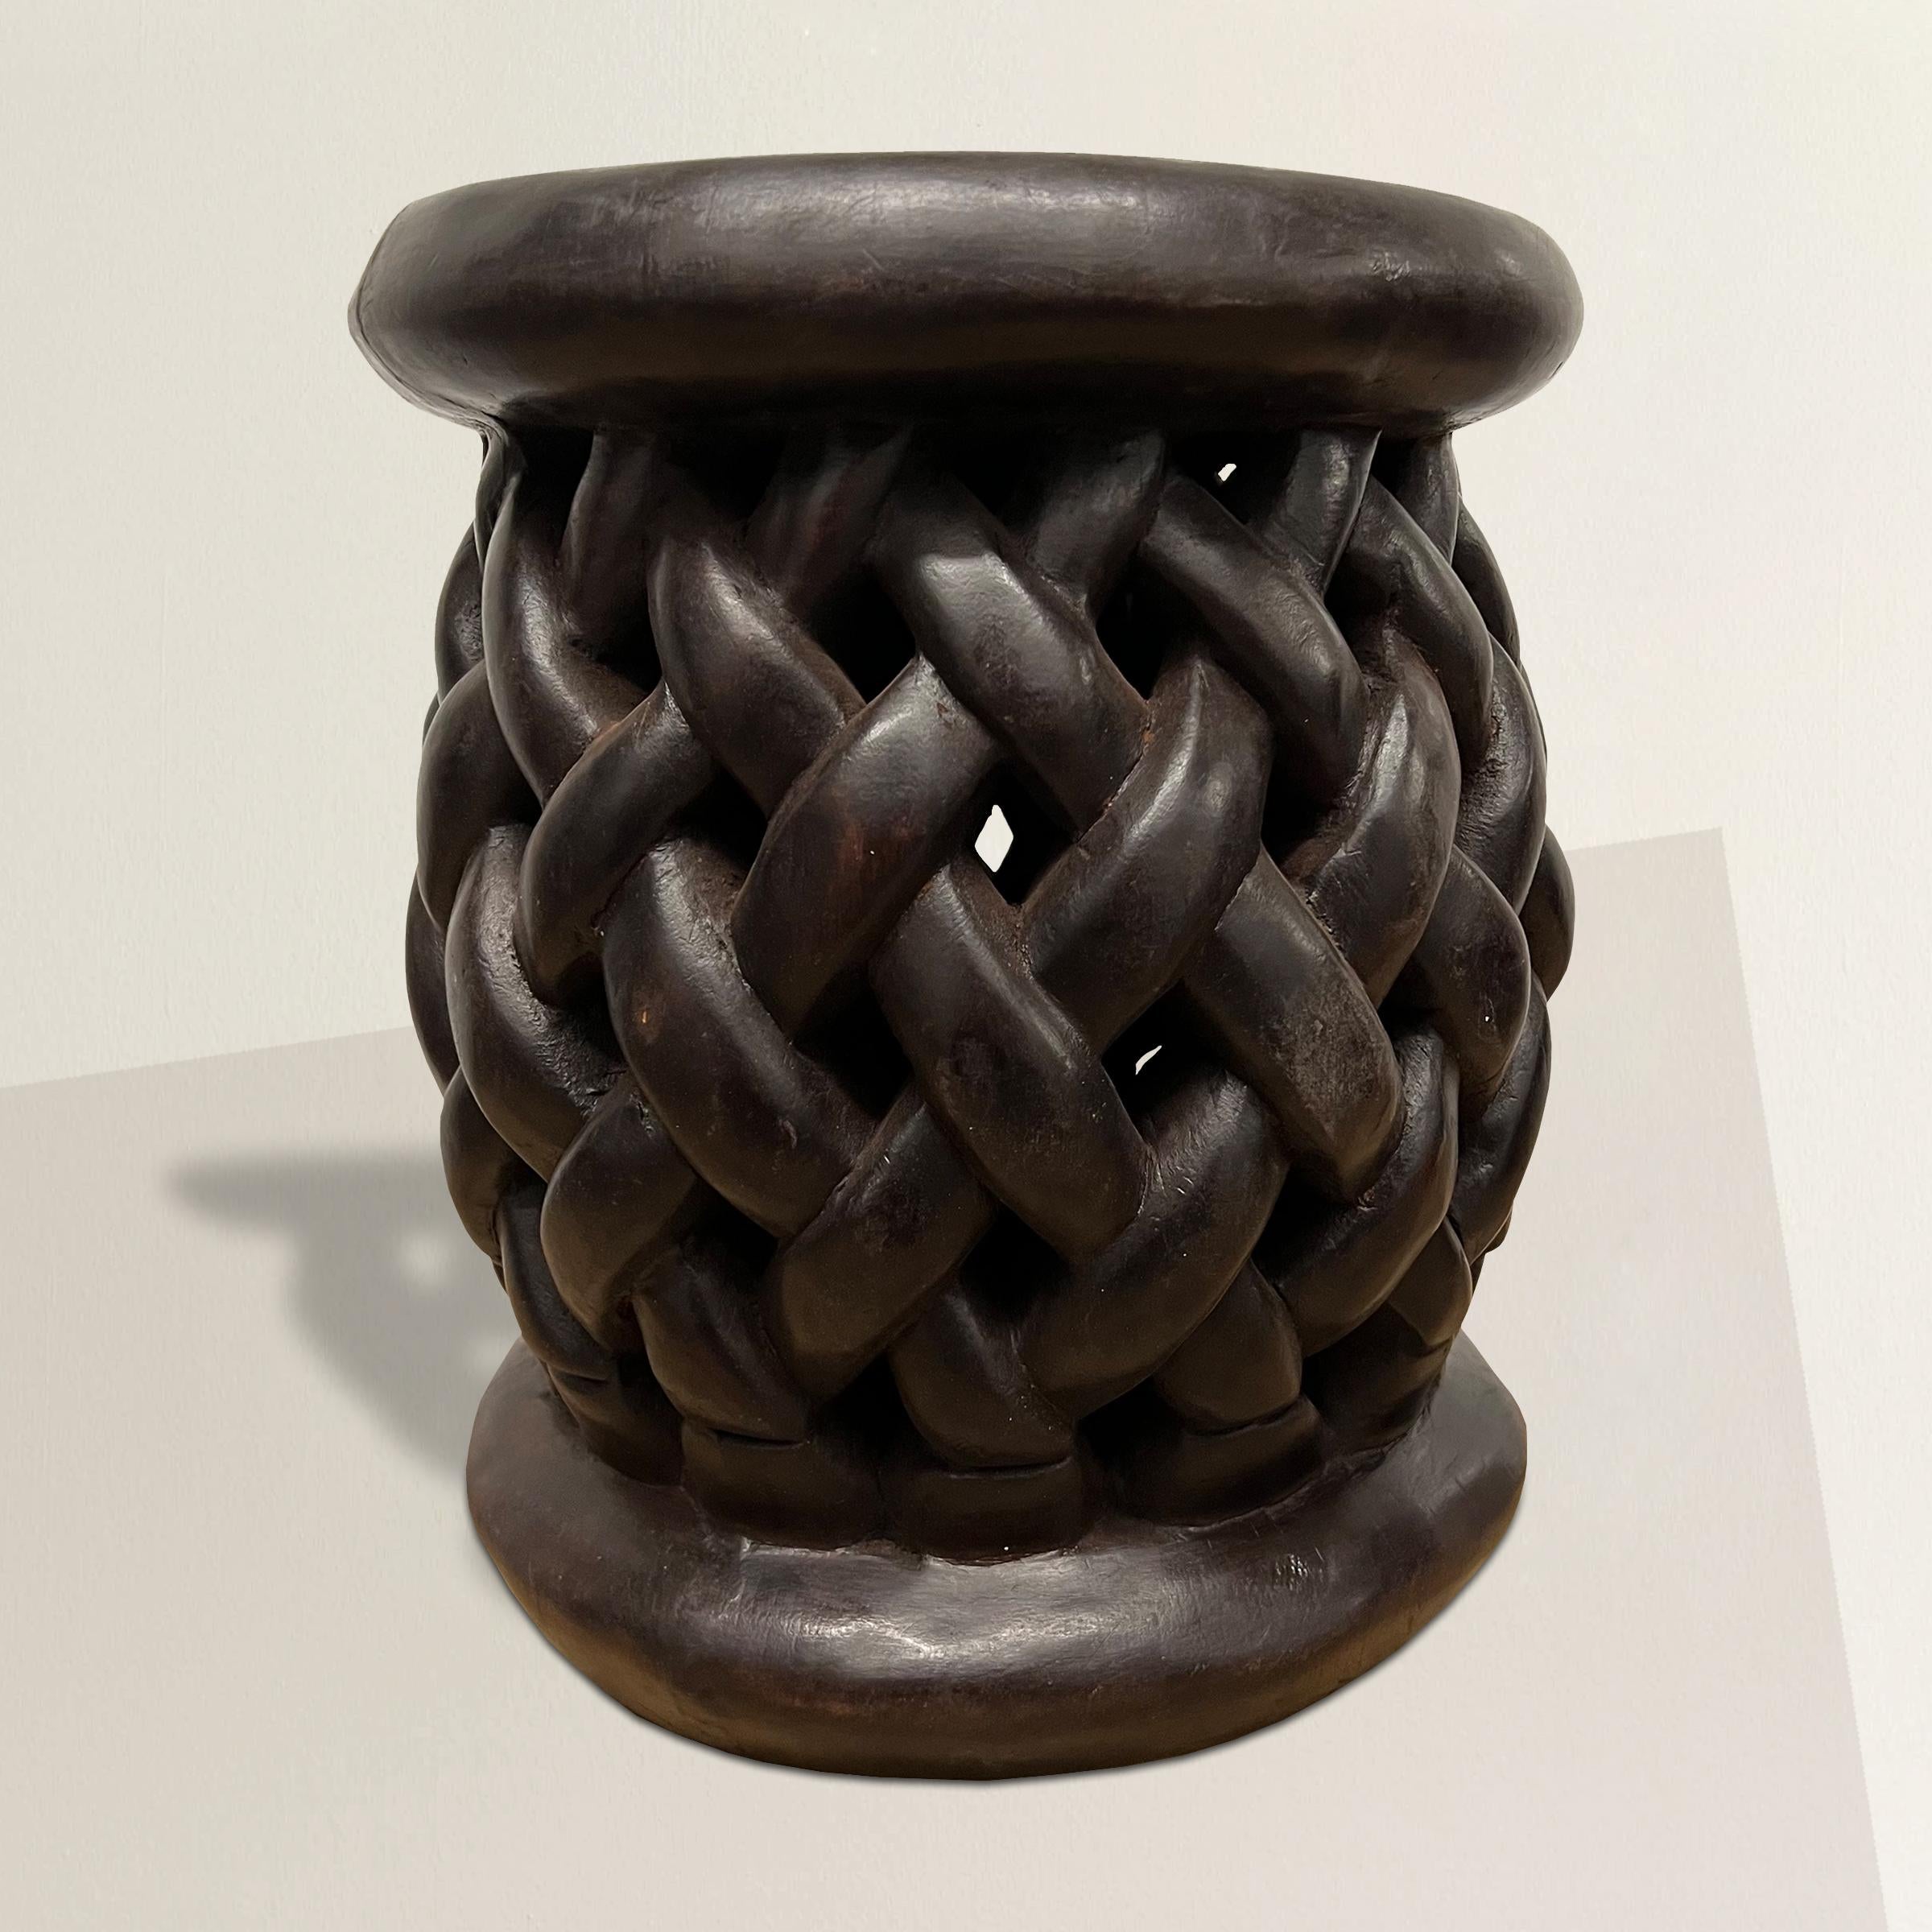 A bold and lively 20th century Bamileke stool hand-carved of one piece of wood with a beautifully designed basket-weave pattern, and with a rich patina that only time can bestow. The stool also doubles as a side table next to your favorite armchair.